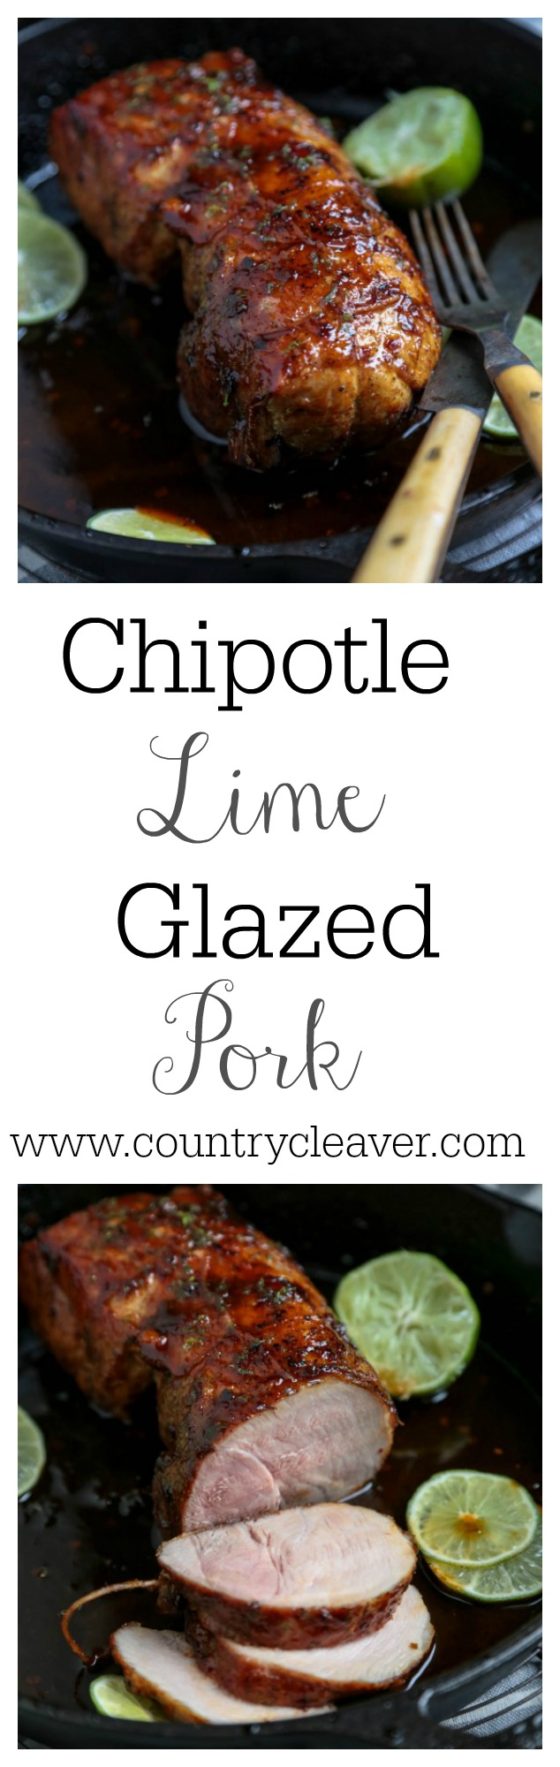 Chipotle Lime Glazed Pork--www.countrycleaver.com